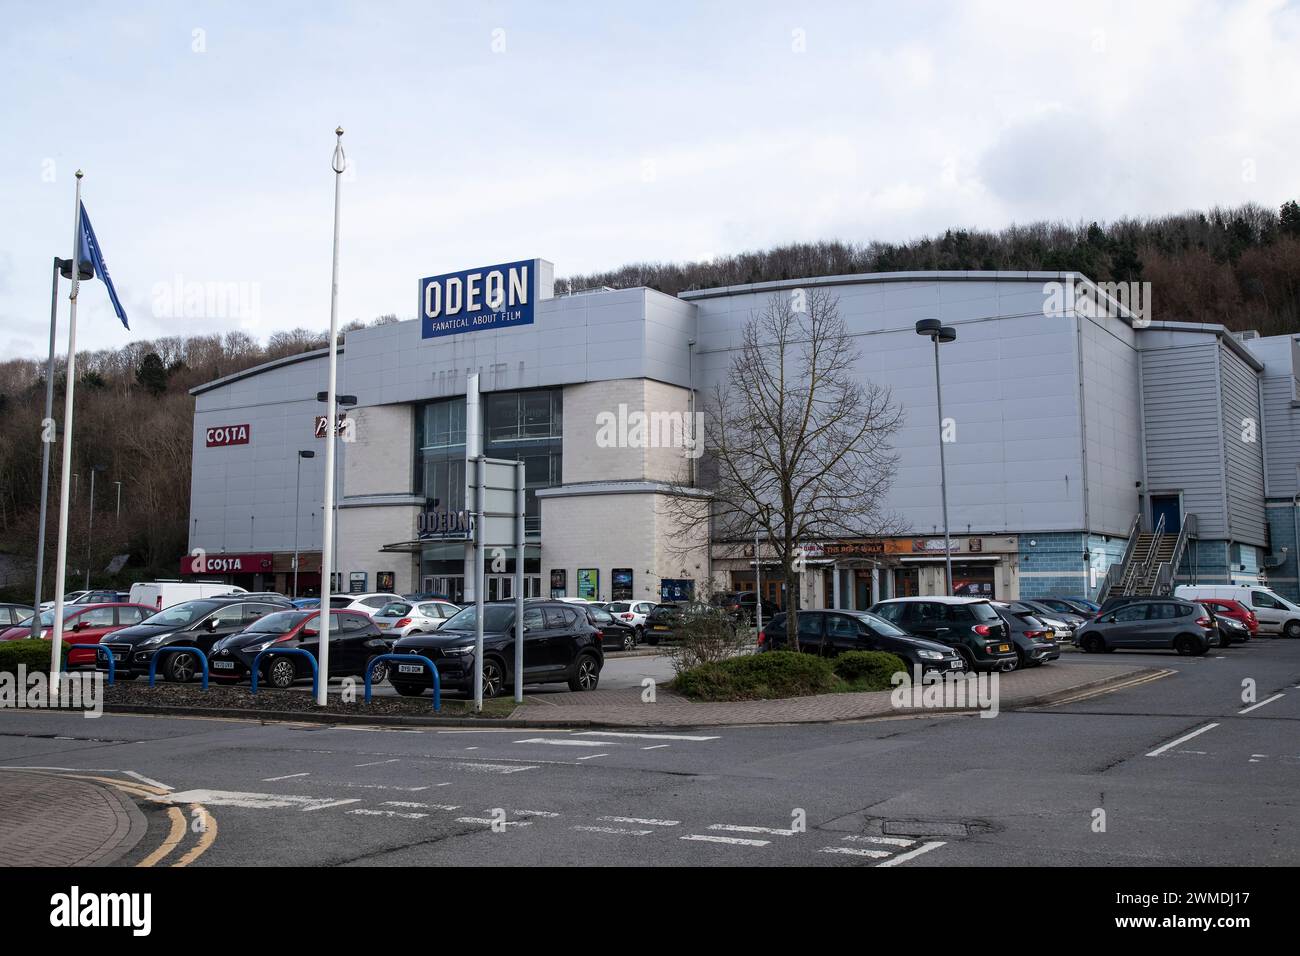 The Odeon cinema in Huddersfield opened in 1997 and contains 9 multiplex screens showing Blockbuster films and complete with café, bar and ice cream Stock Photo